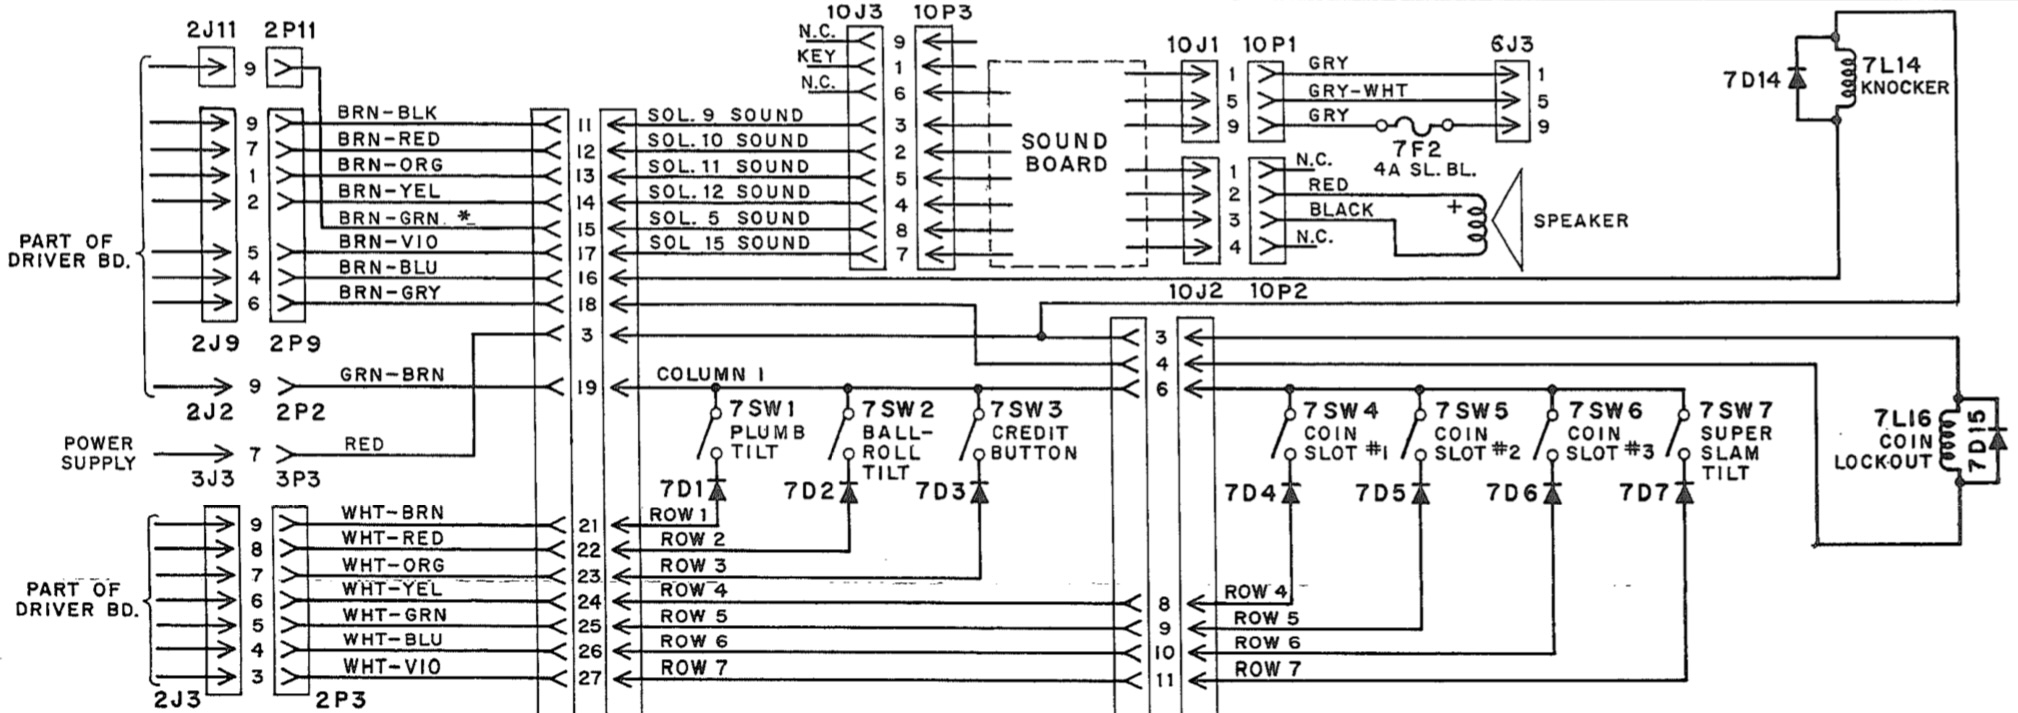 Sample schematic from an EM pinball table.